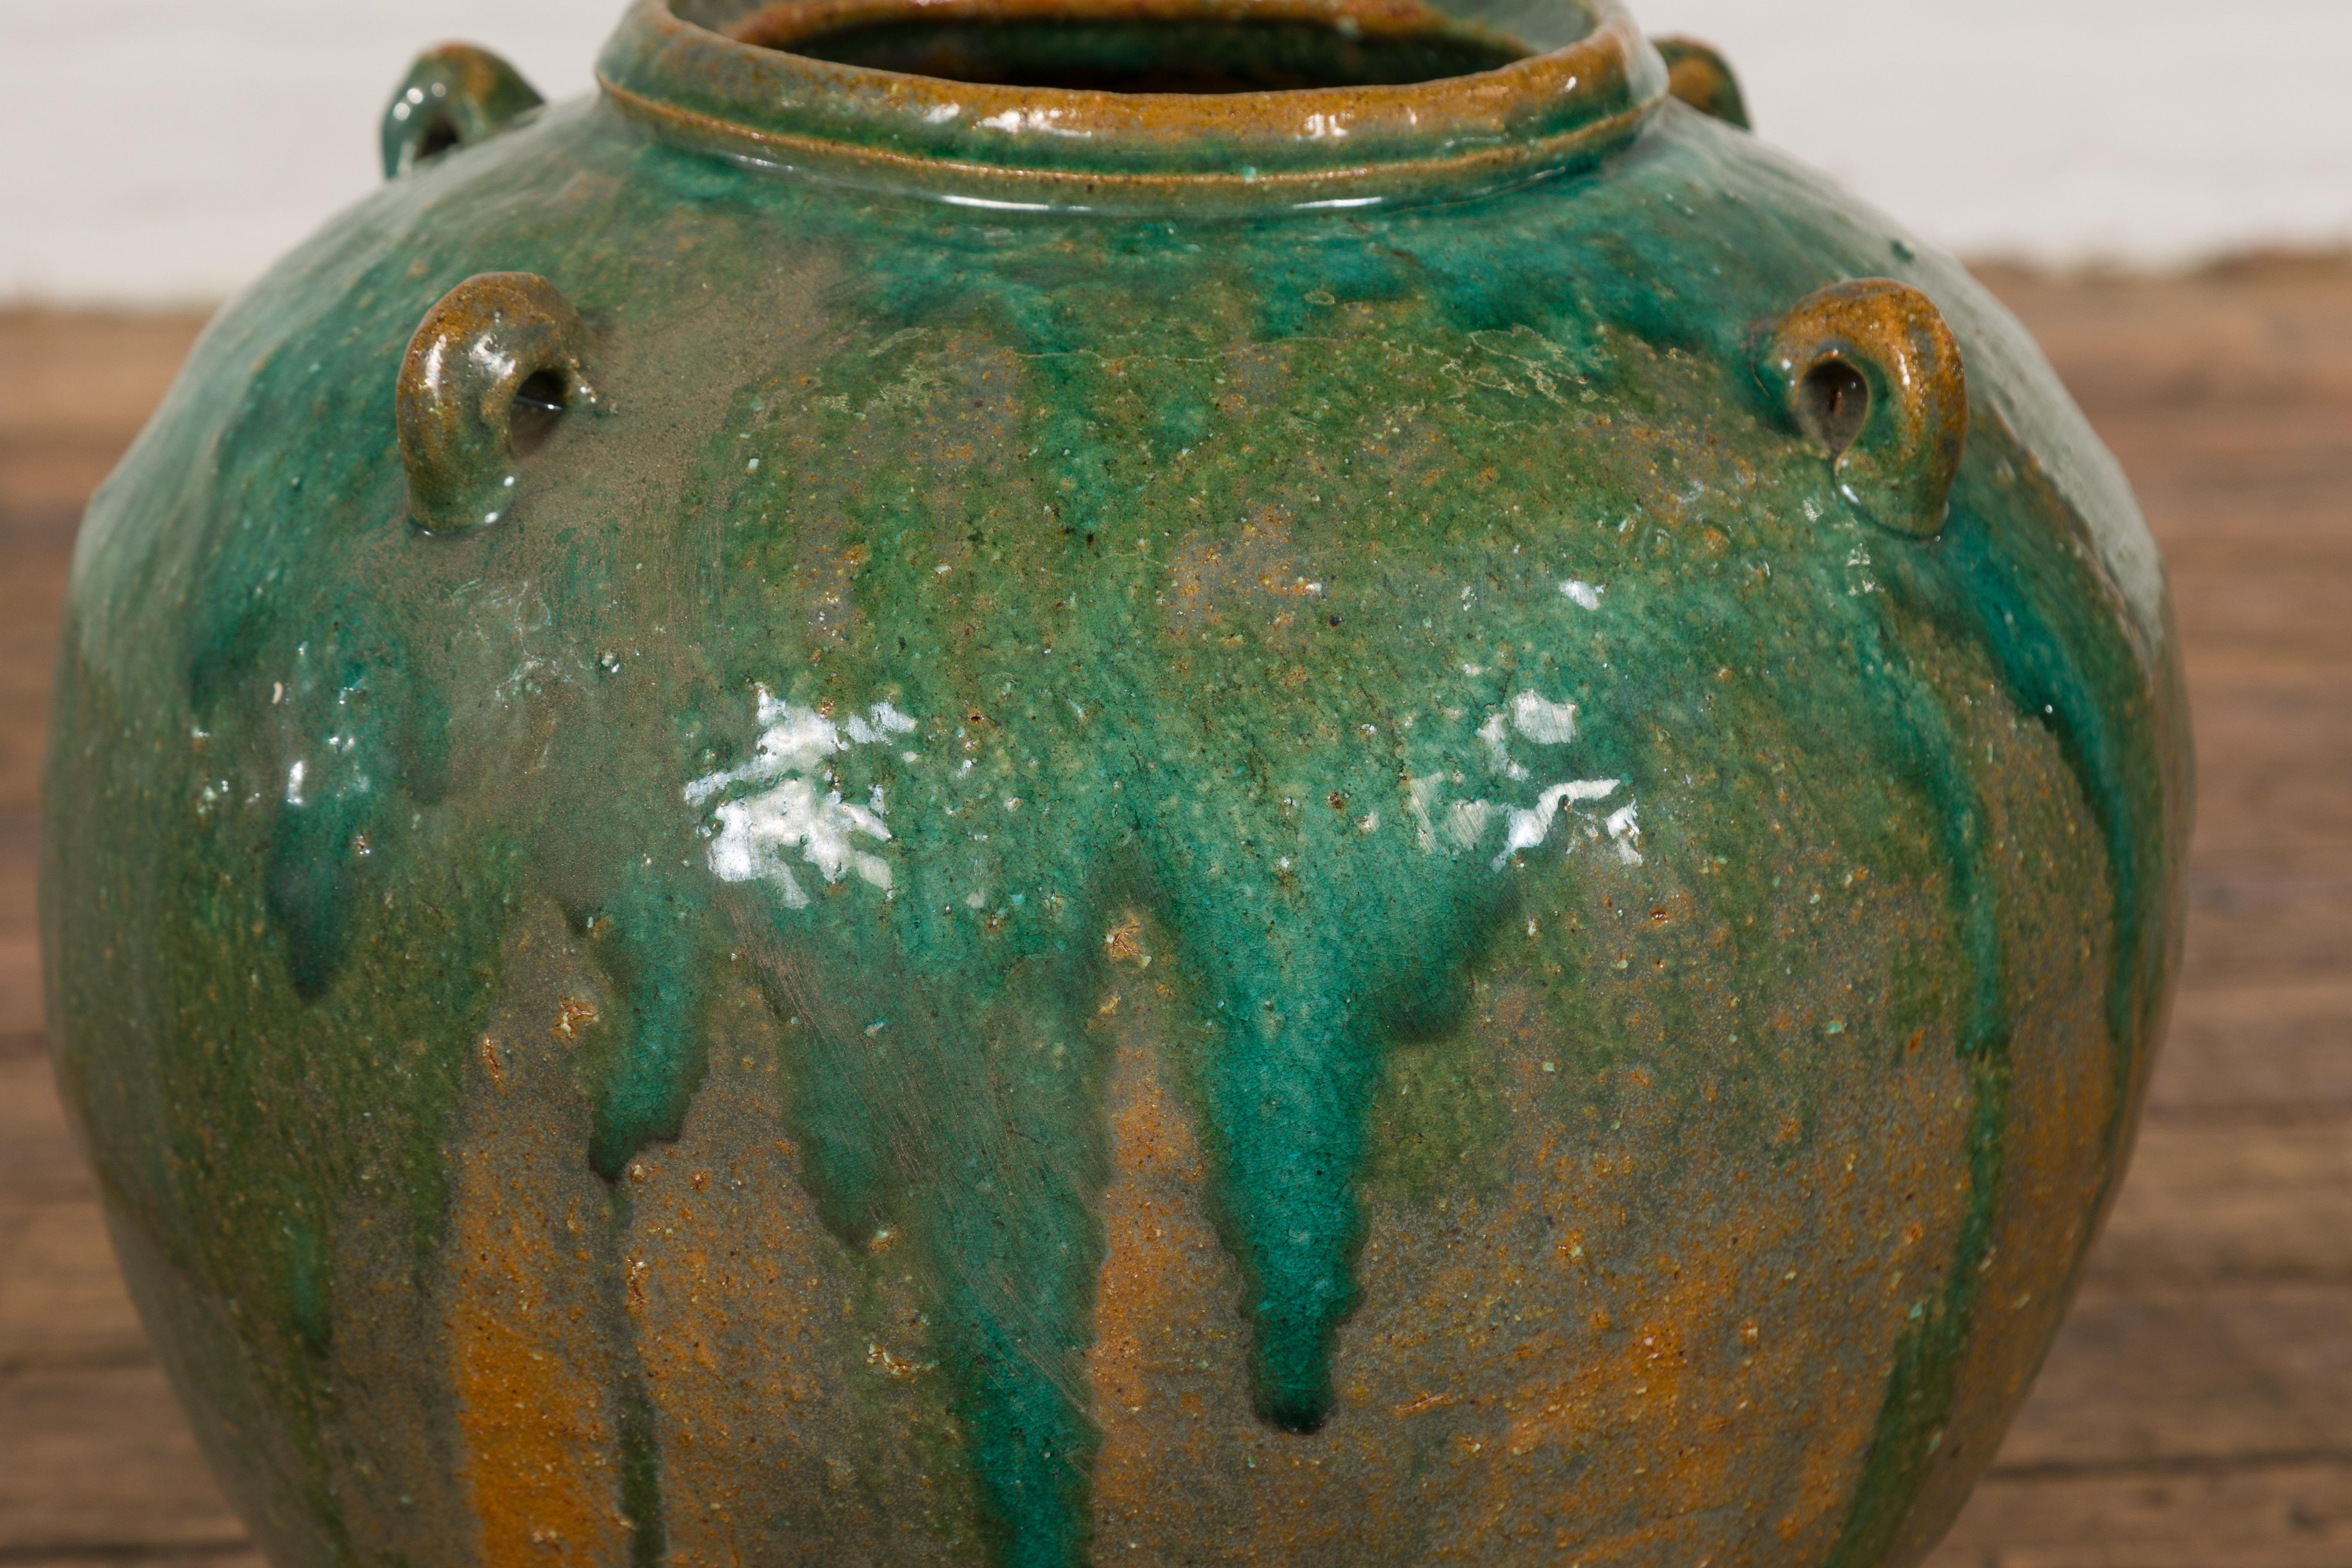 Orange & Brown Antique Jar with Green Drips  For Sale 2